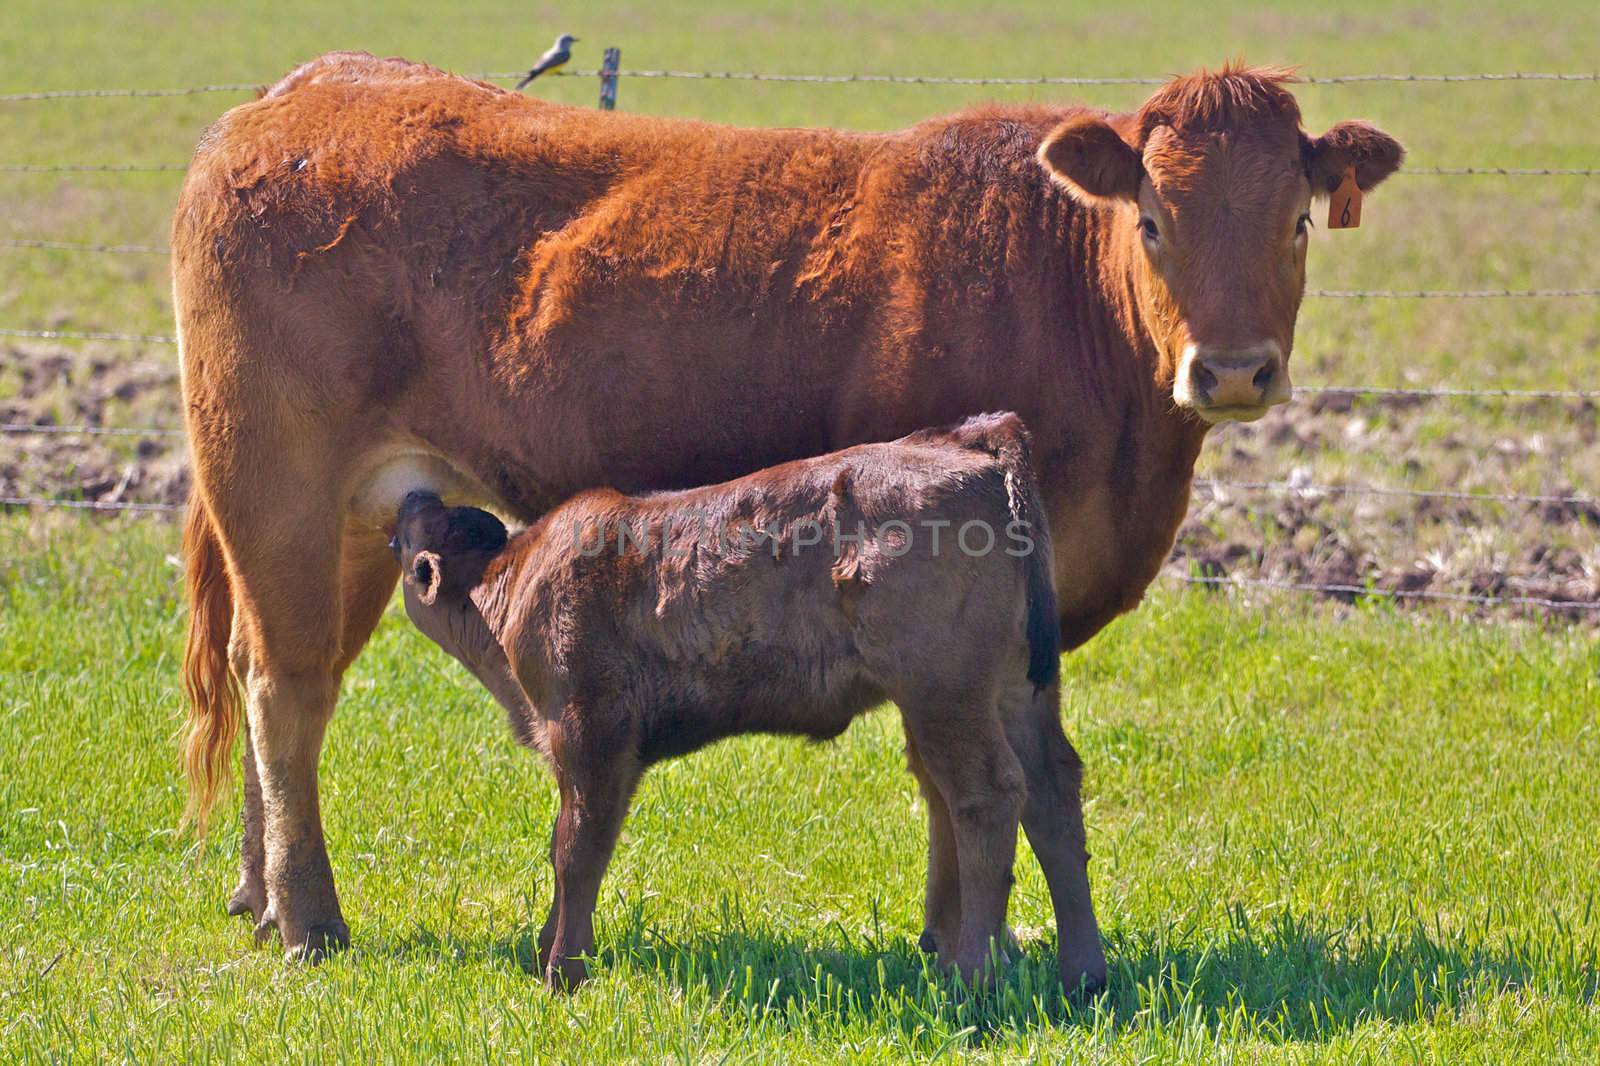 A mother cow with nursing calf